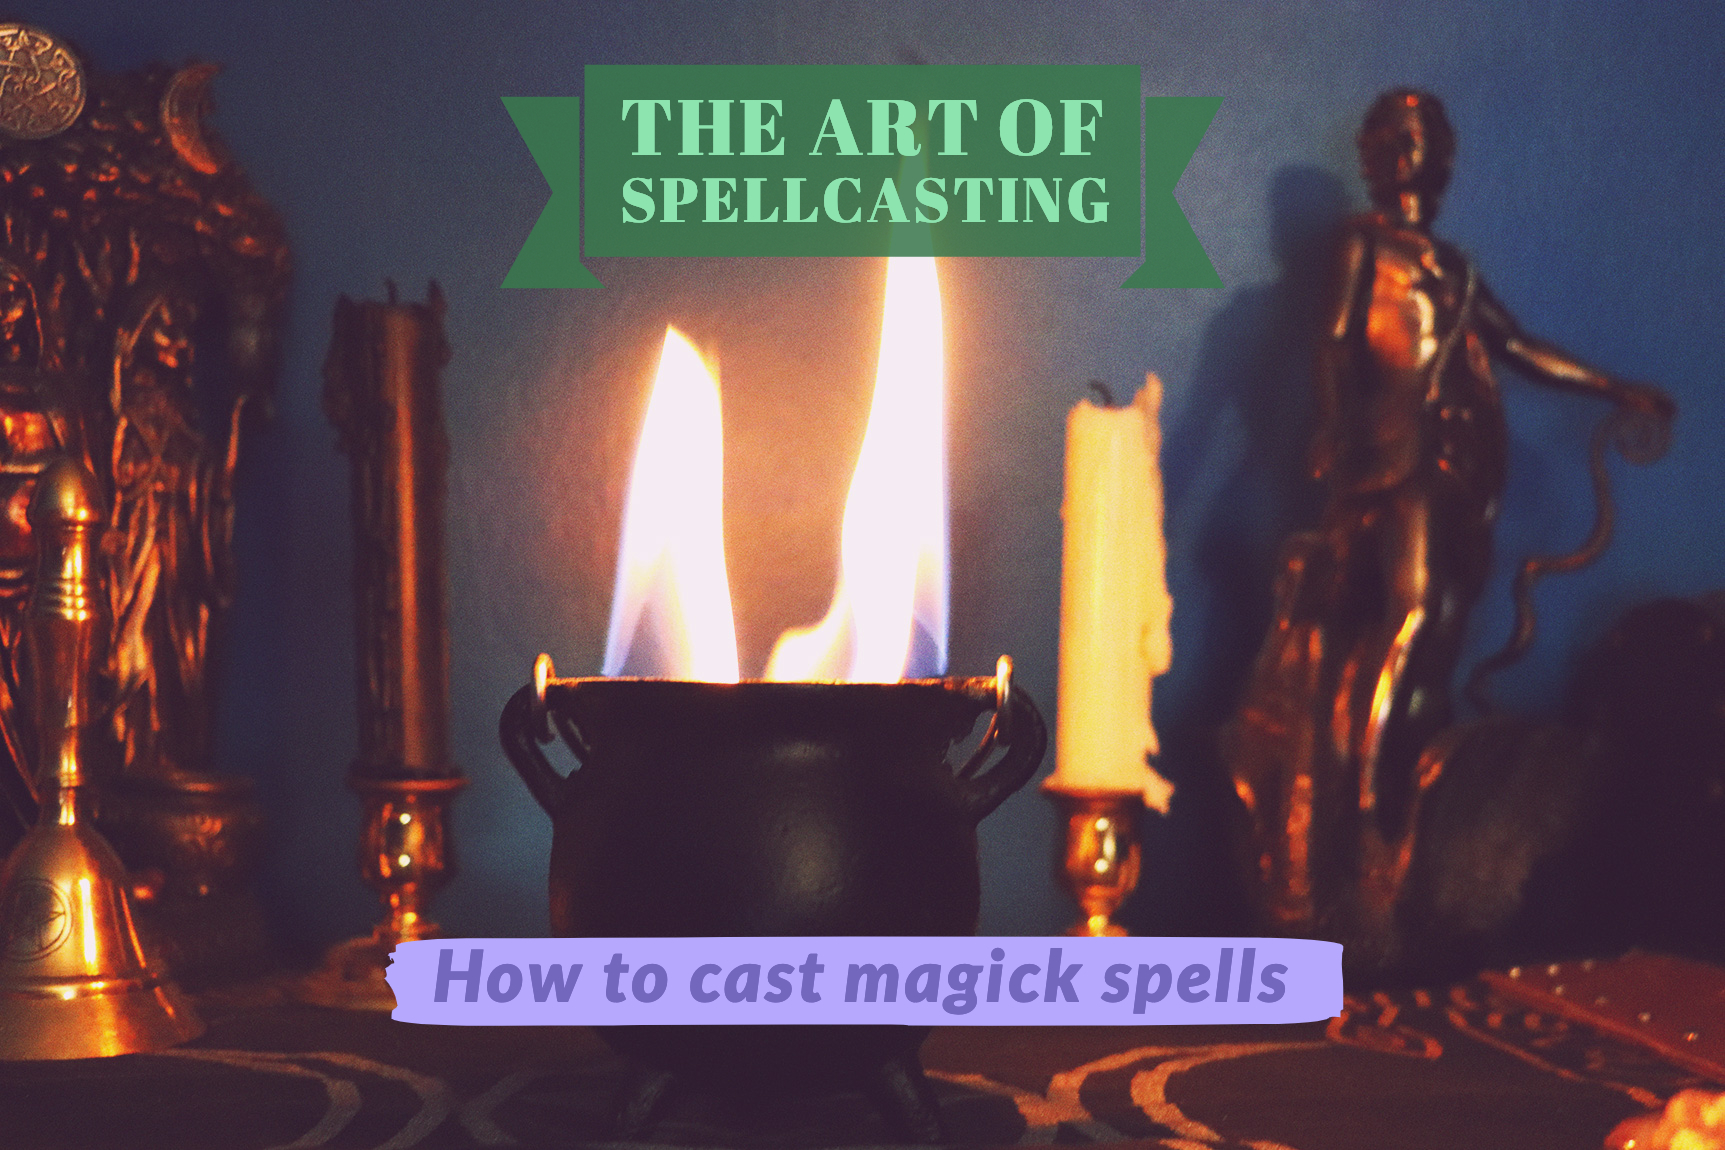 Spell-casting: How to Cast Magick Spells